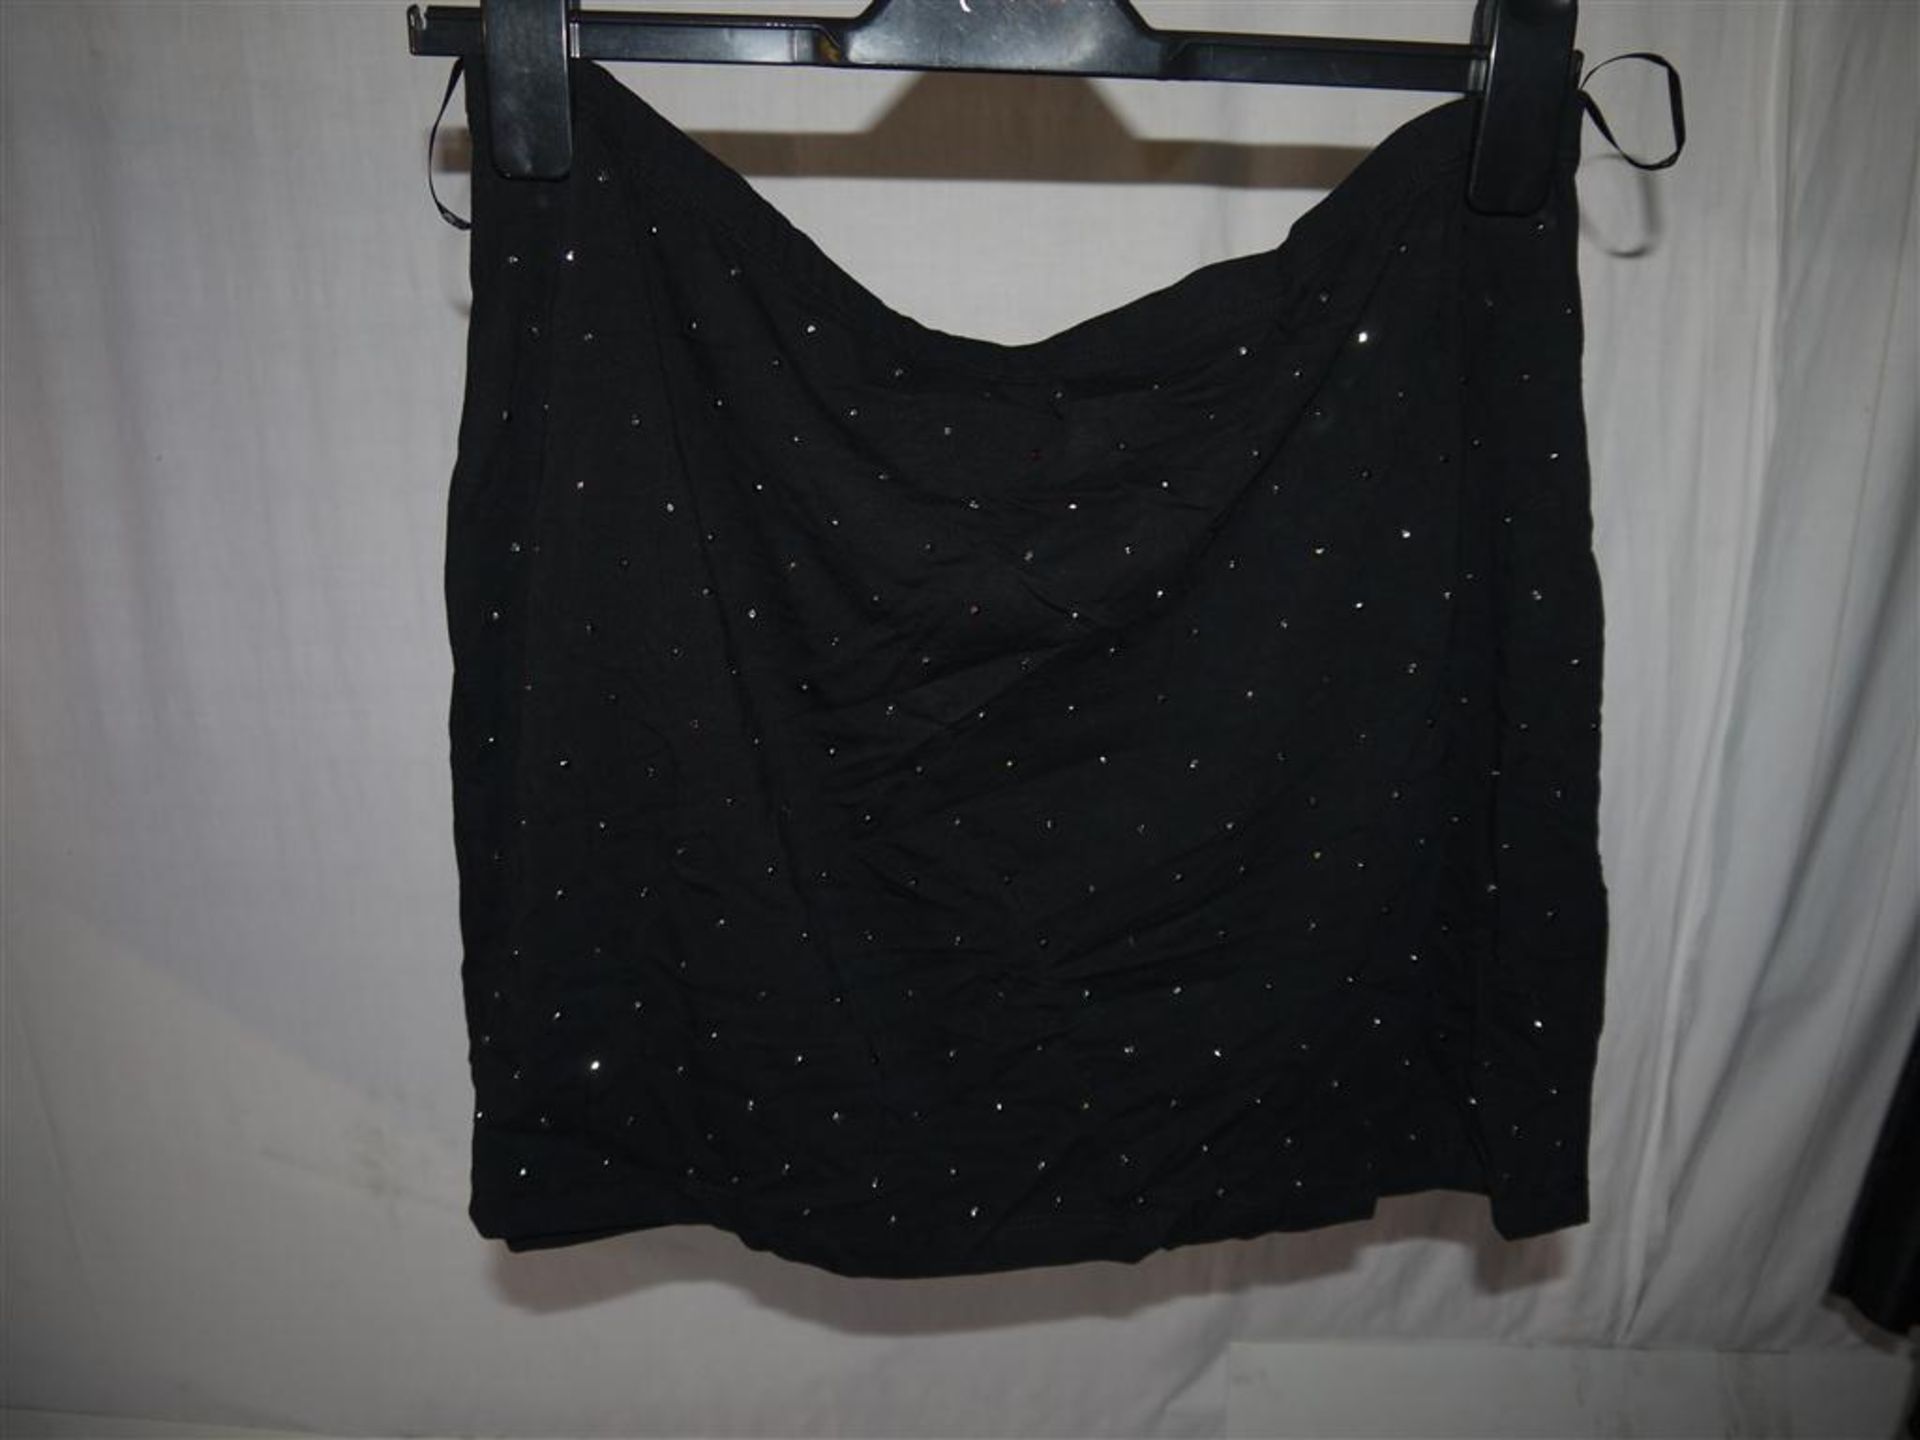 82 x Items Of Assorted Women's Clothing - Box407 - Shorts, Skirts, Pants, Tops & Swimwear - Sizes - Image 9 of 21